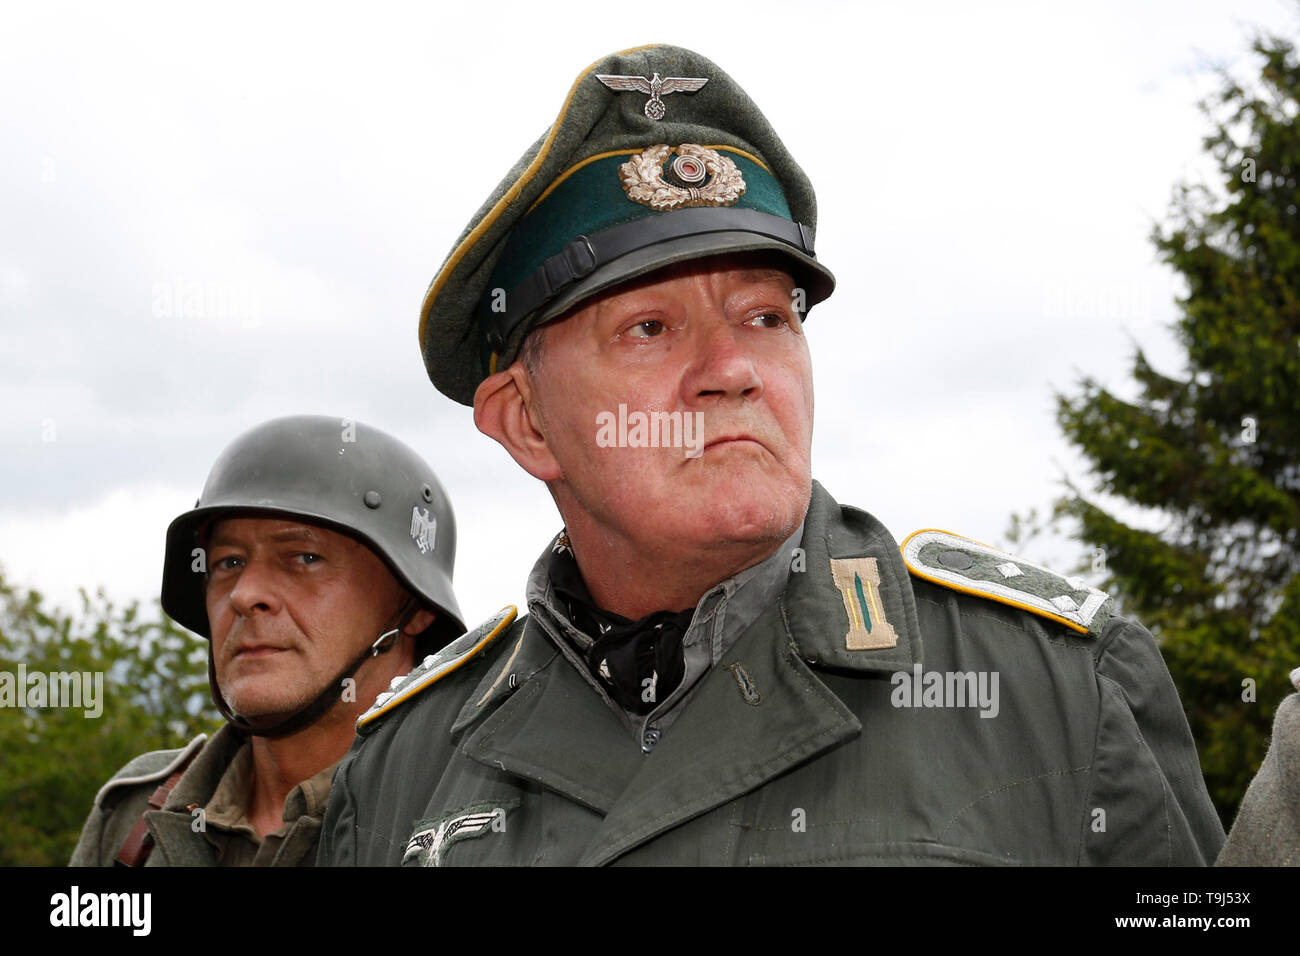 Haworth, Yorkshire, UK. 19th May 2019. A group of men in German Army uniforms at Haworth 1940s weekend, an annual event in the West Yorkshire village. Credit: West Yorkshire Images/Alamy Live News Stock Photo